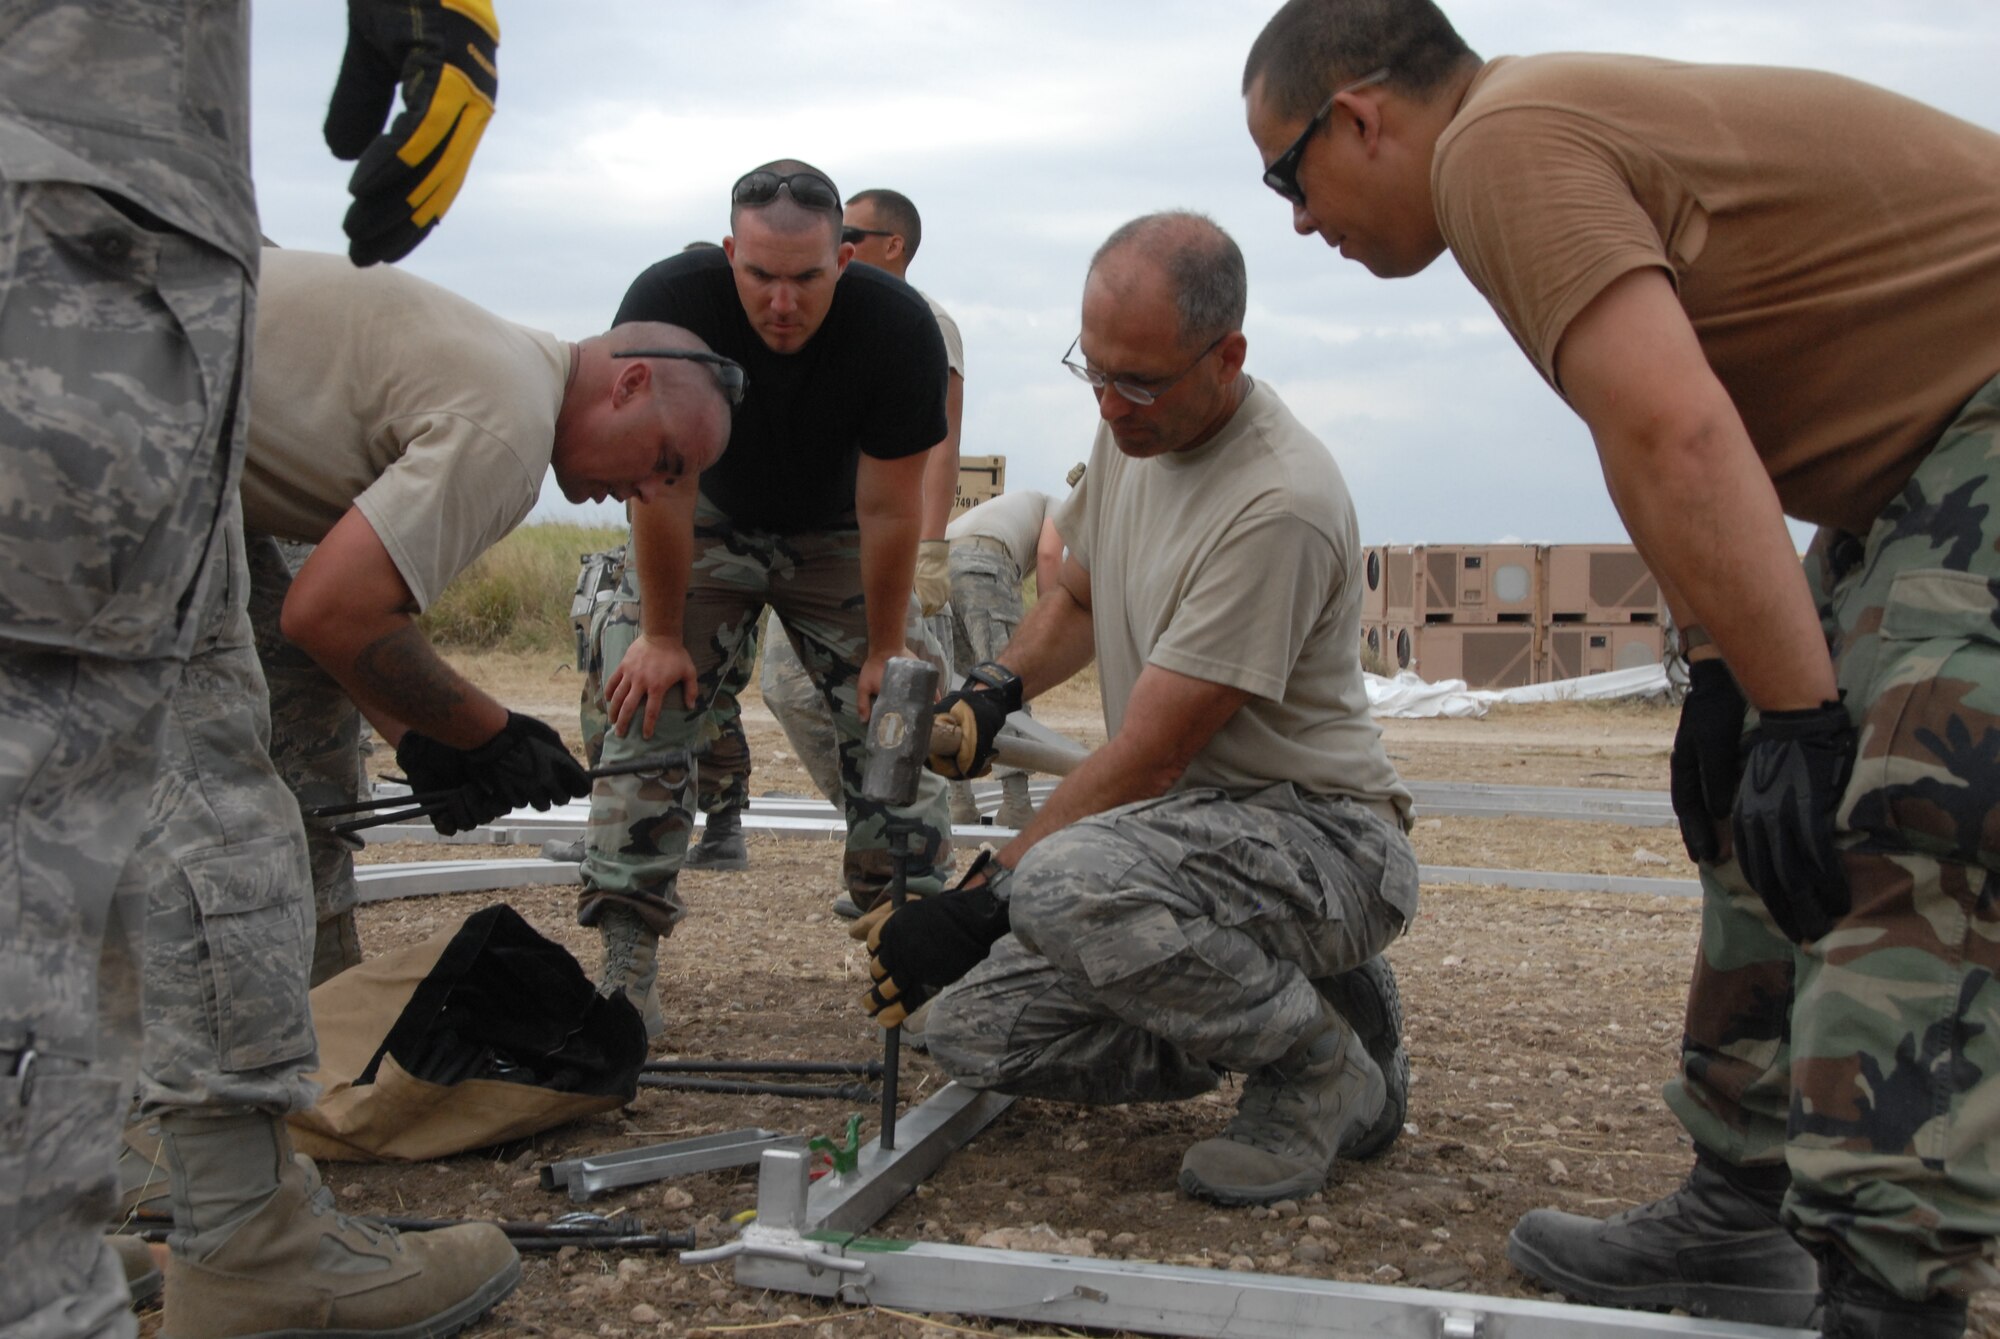 Lt. Col. Mark Green (center), commander of the 190th Civil Engineering Squadron deployed to Haiti, demonstrates the proper technique for anchoring an Expeditionary Medical Support (EMEDS) hospital.  Green, who commanded the Guardsmen that built the EMEDS in Greensburg, Kansas, in 2007, is one of 46 Kansas Guardsmen deployed to build infrastructure for sustained operations in Haiti.